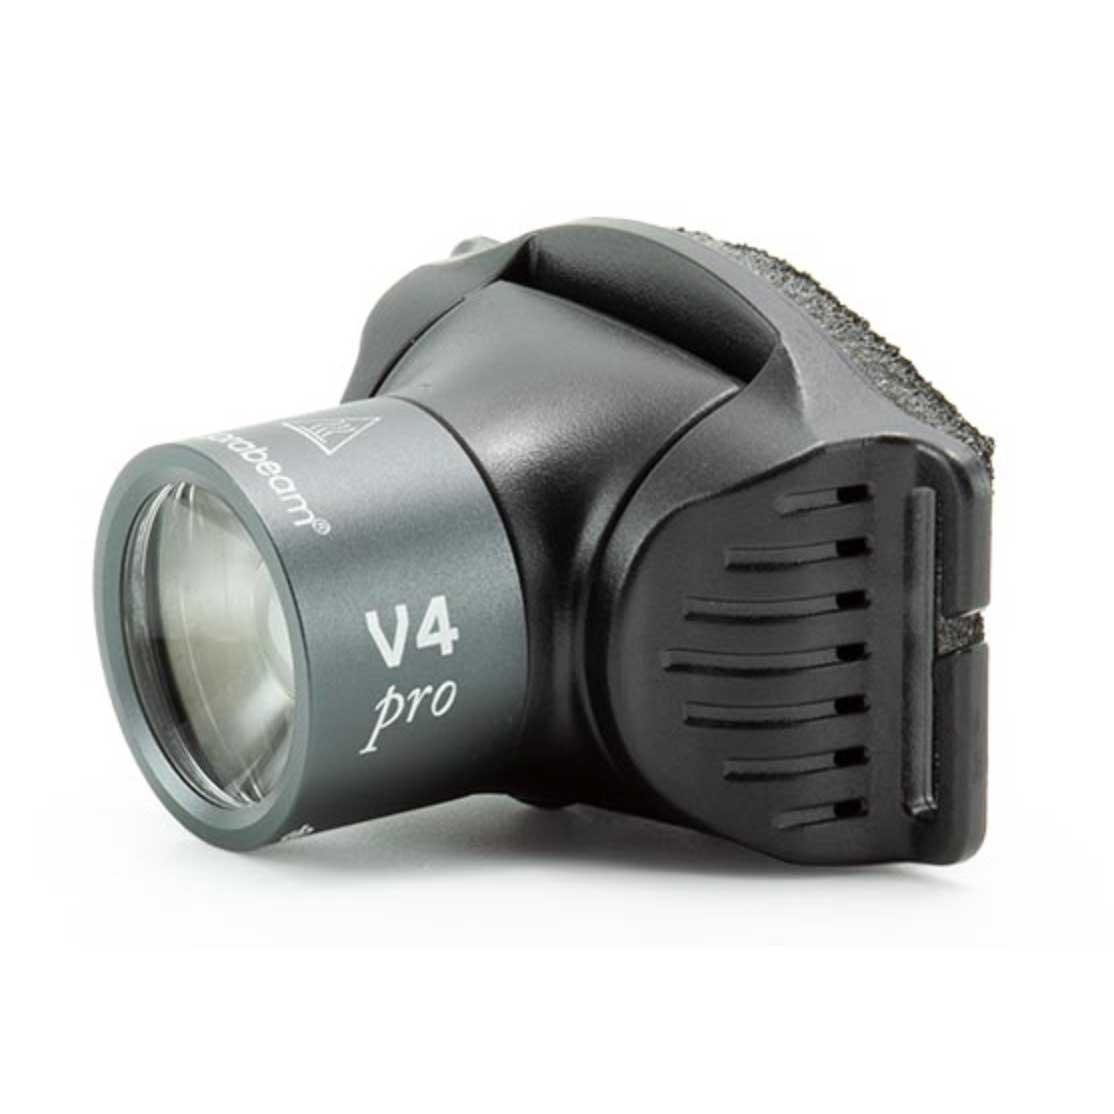 Suprabeam Stirnlampe V4pro rechargeable